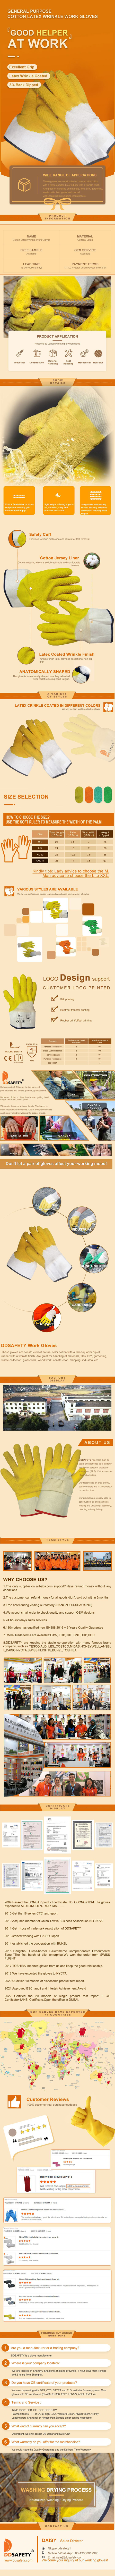 Yellow Cotton Latex Crinkle Coated Crinkle Finish Work Gloves Safety Cuff - DCL413 Yellow Cotton Latex Crinkle Coated Crinkle Finish Work Gloves Safety Cuff - DCL413 gloves,latex coated gloves,work gloves,cotton work gloves,latex crinkle gloves